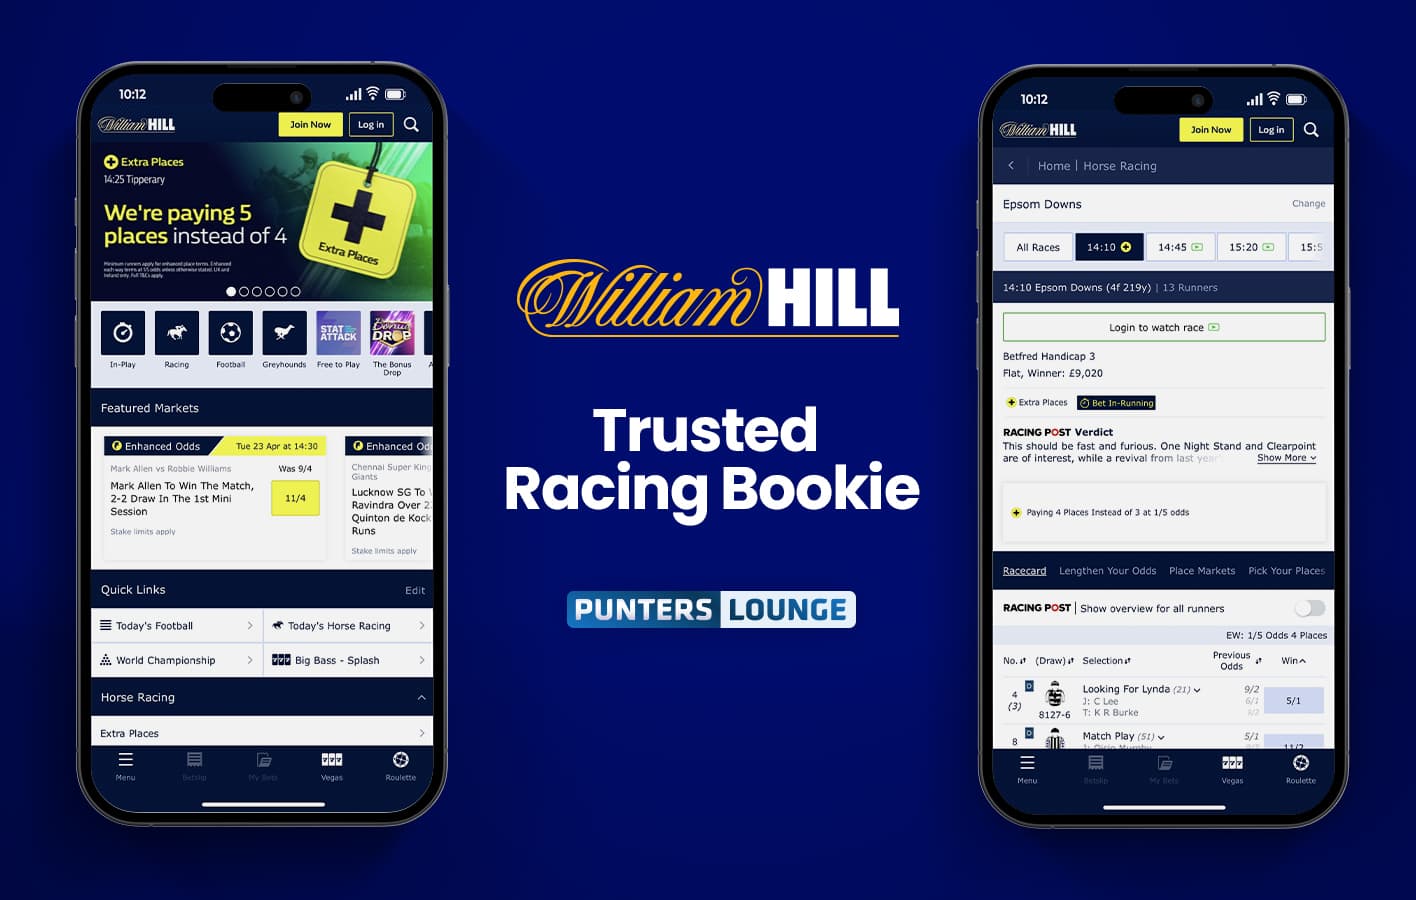 An image of William Hill who is one of the best betting app for horse racing.